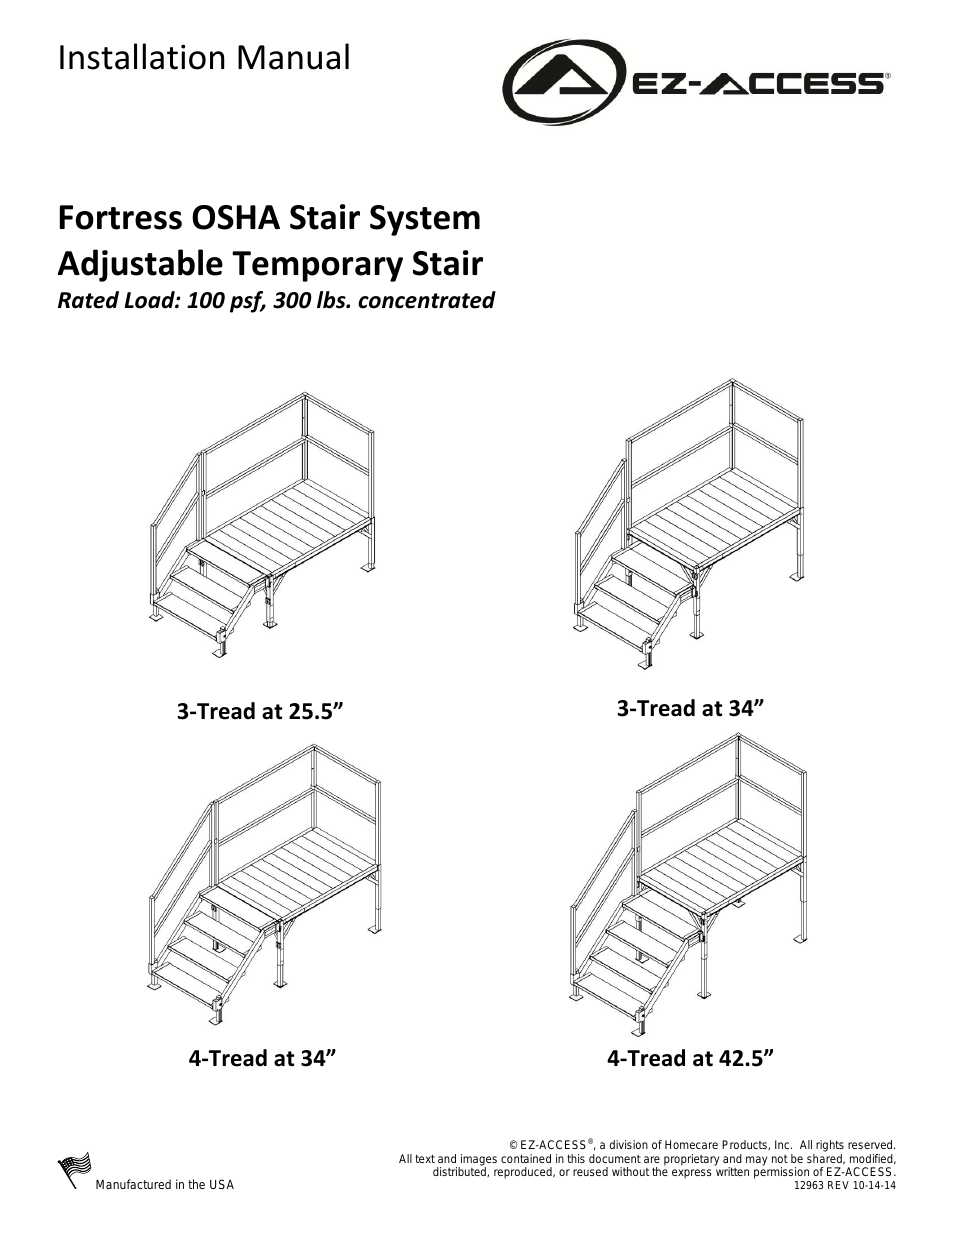 FORTRES OSHA STAIR SYSTEM